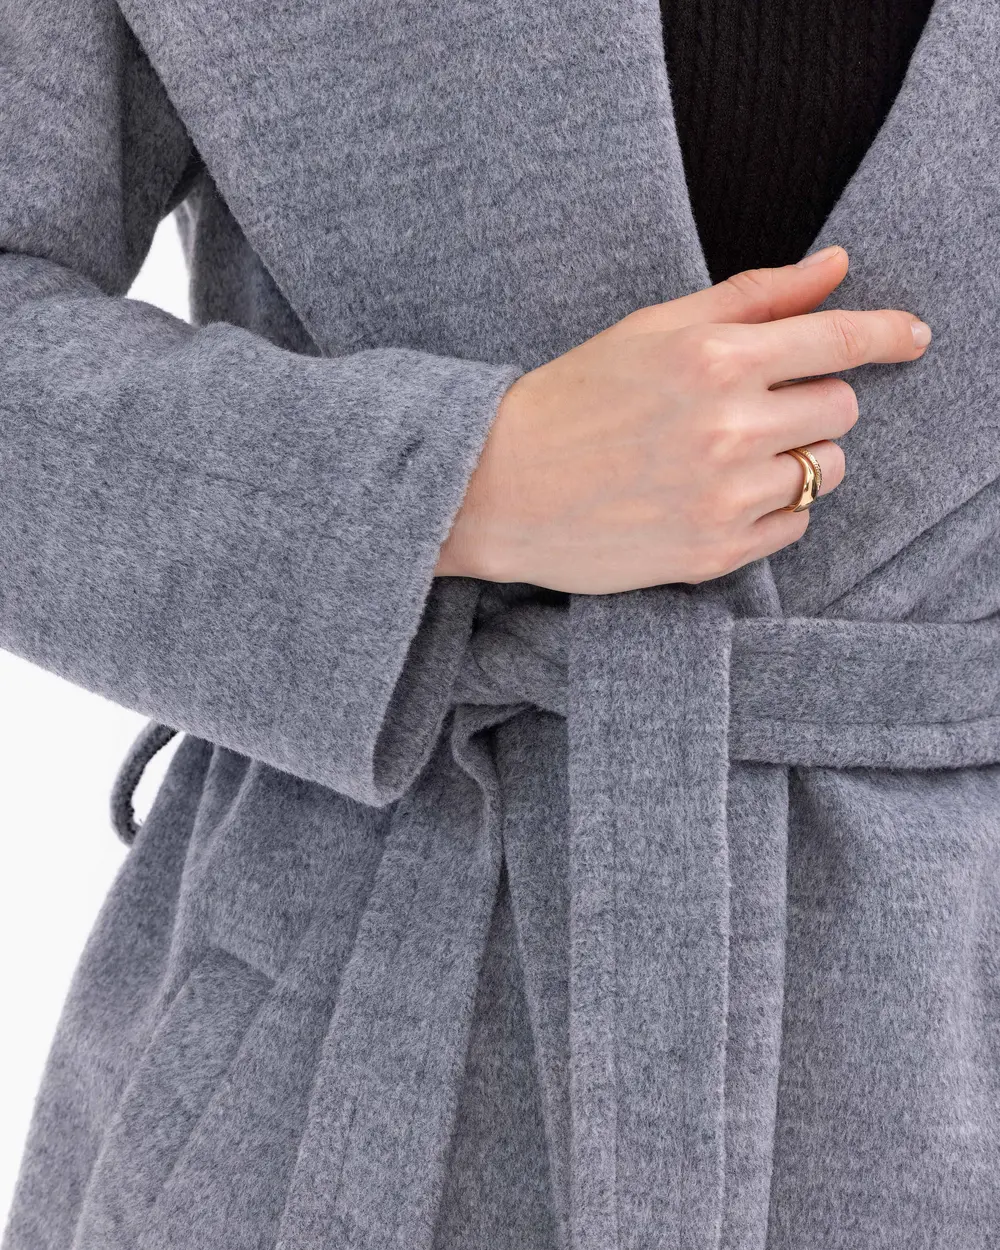 Wrap Collar Mid-Length Lined Coat